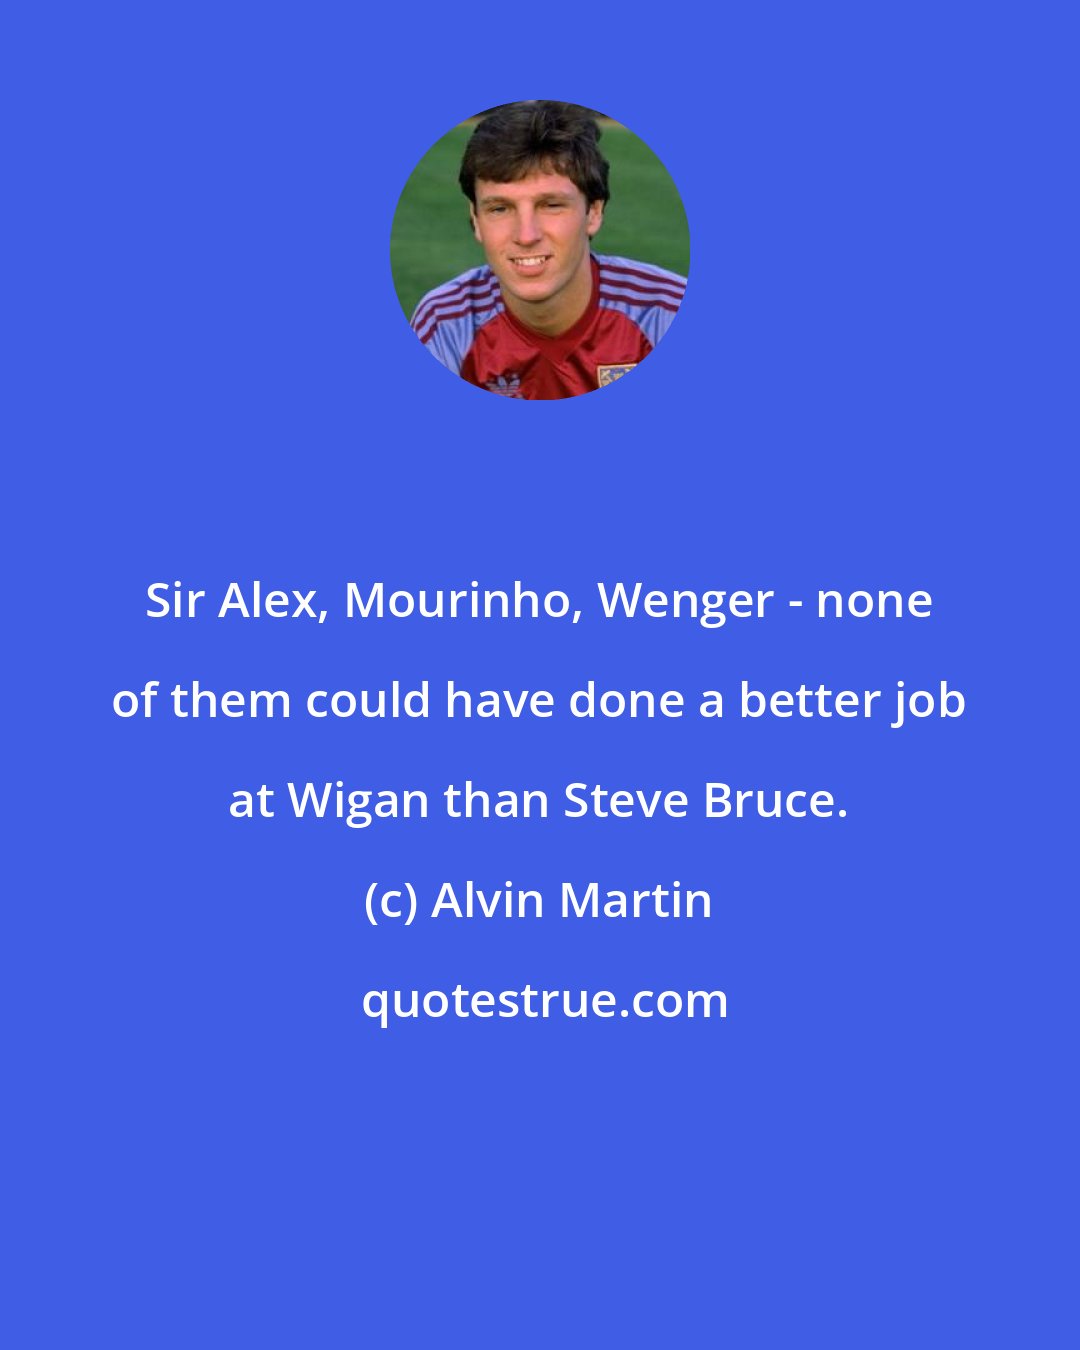 Alvin Martin: Sir Alex, Mourinho, Wenger - none of them could have done a better job at Wigan than Steve Bruce.